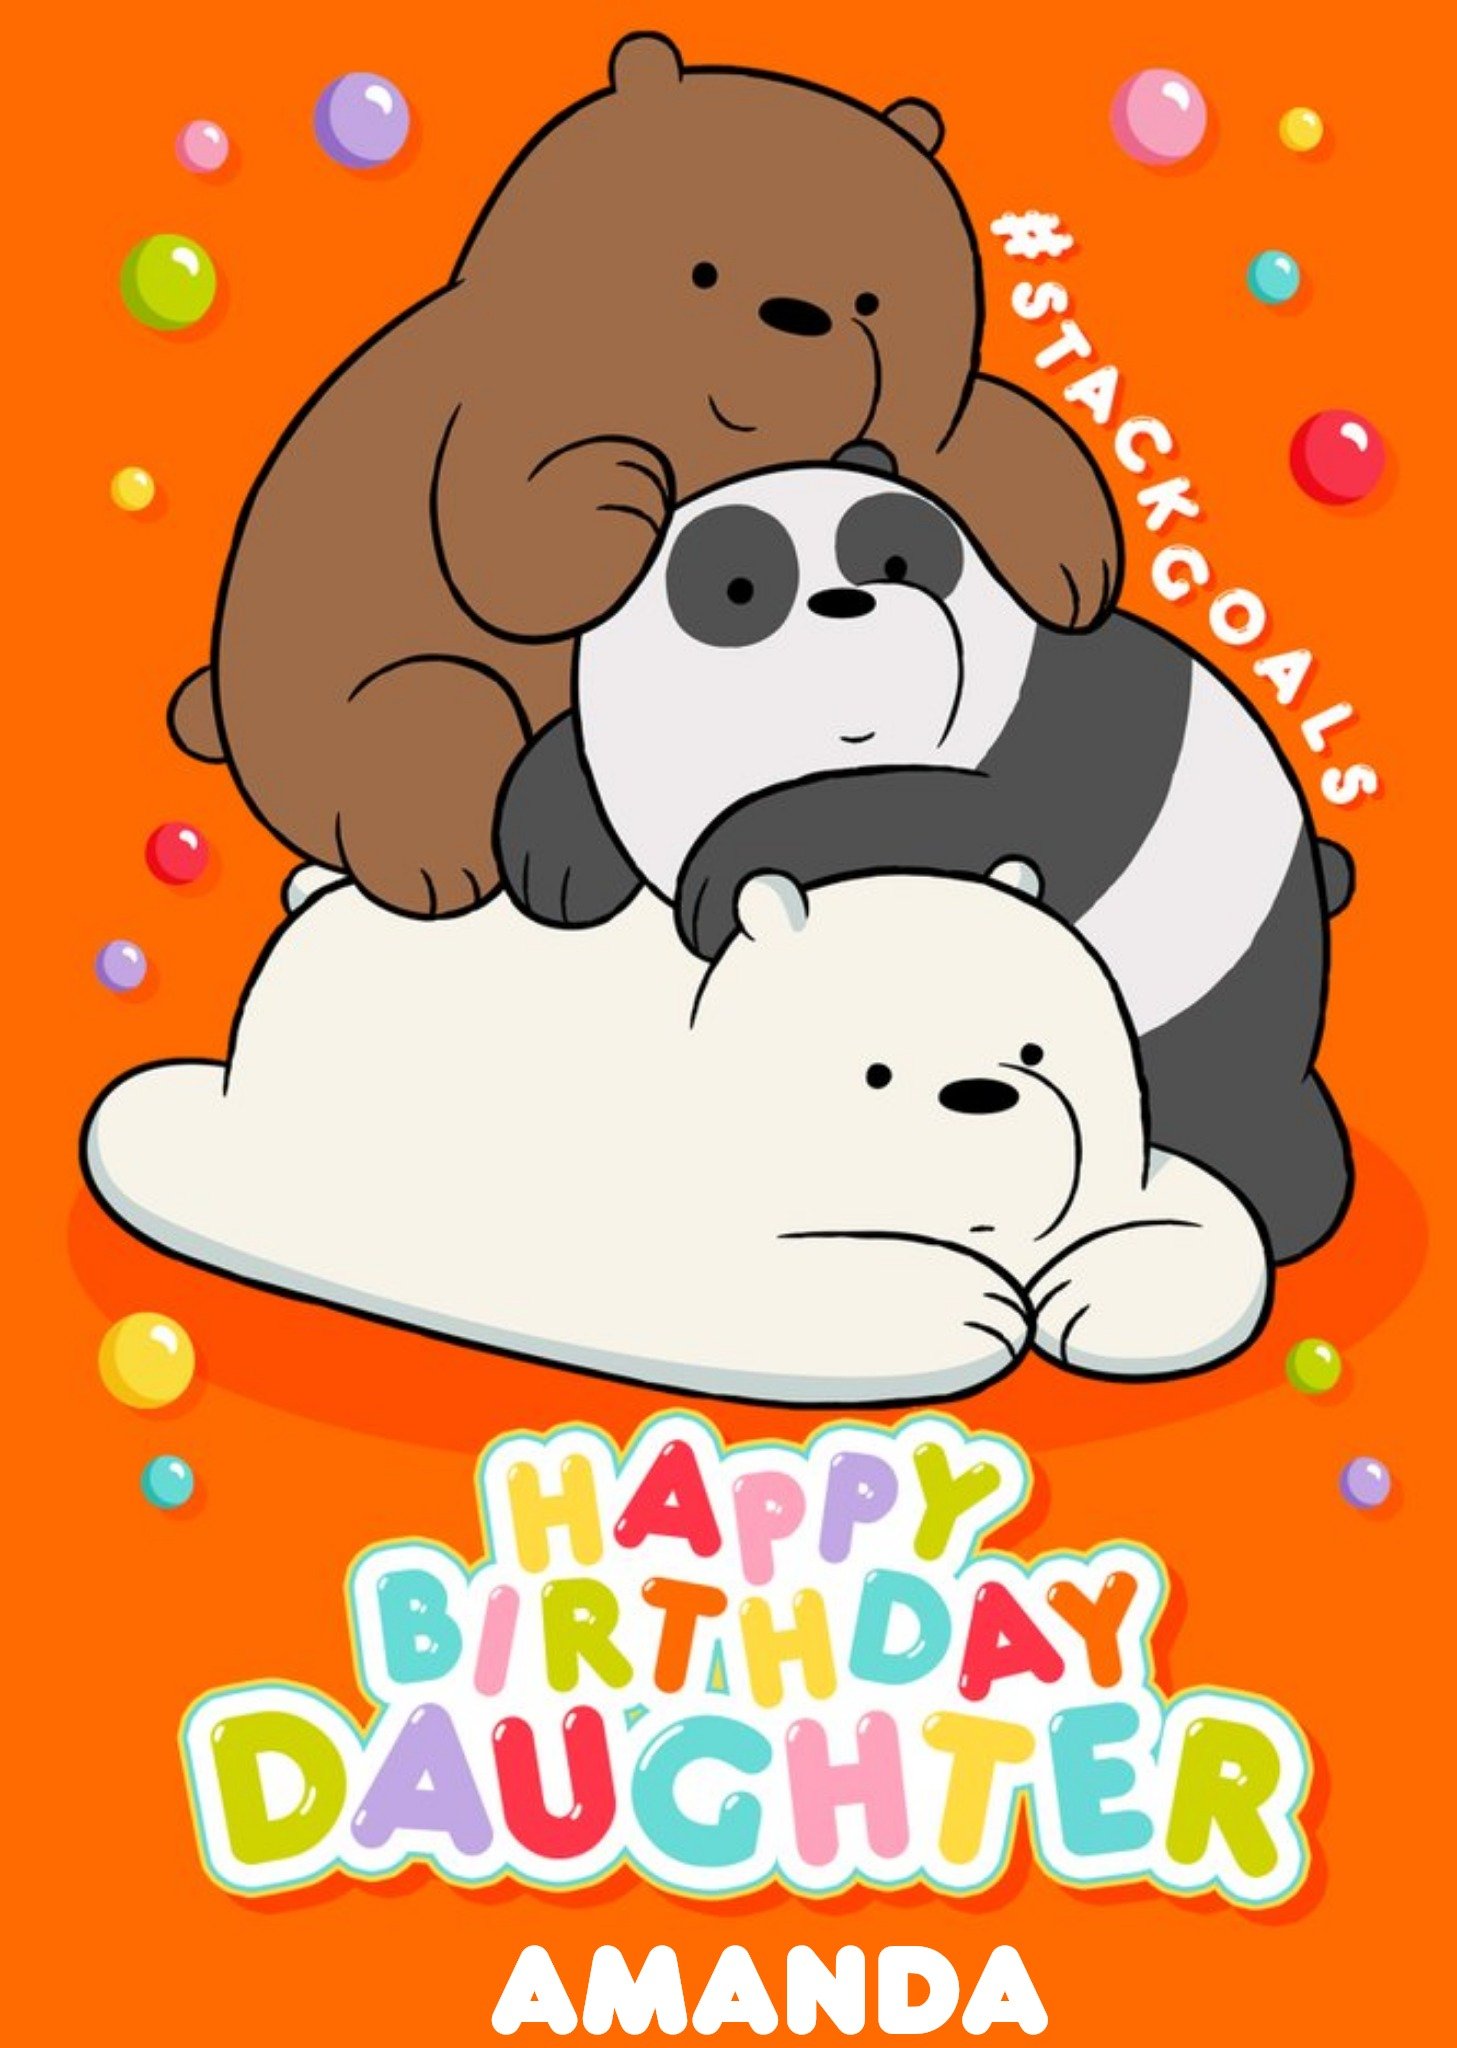 Moonpig We Bare Bears Happy Birthday Daughter Personalised Card, Large